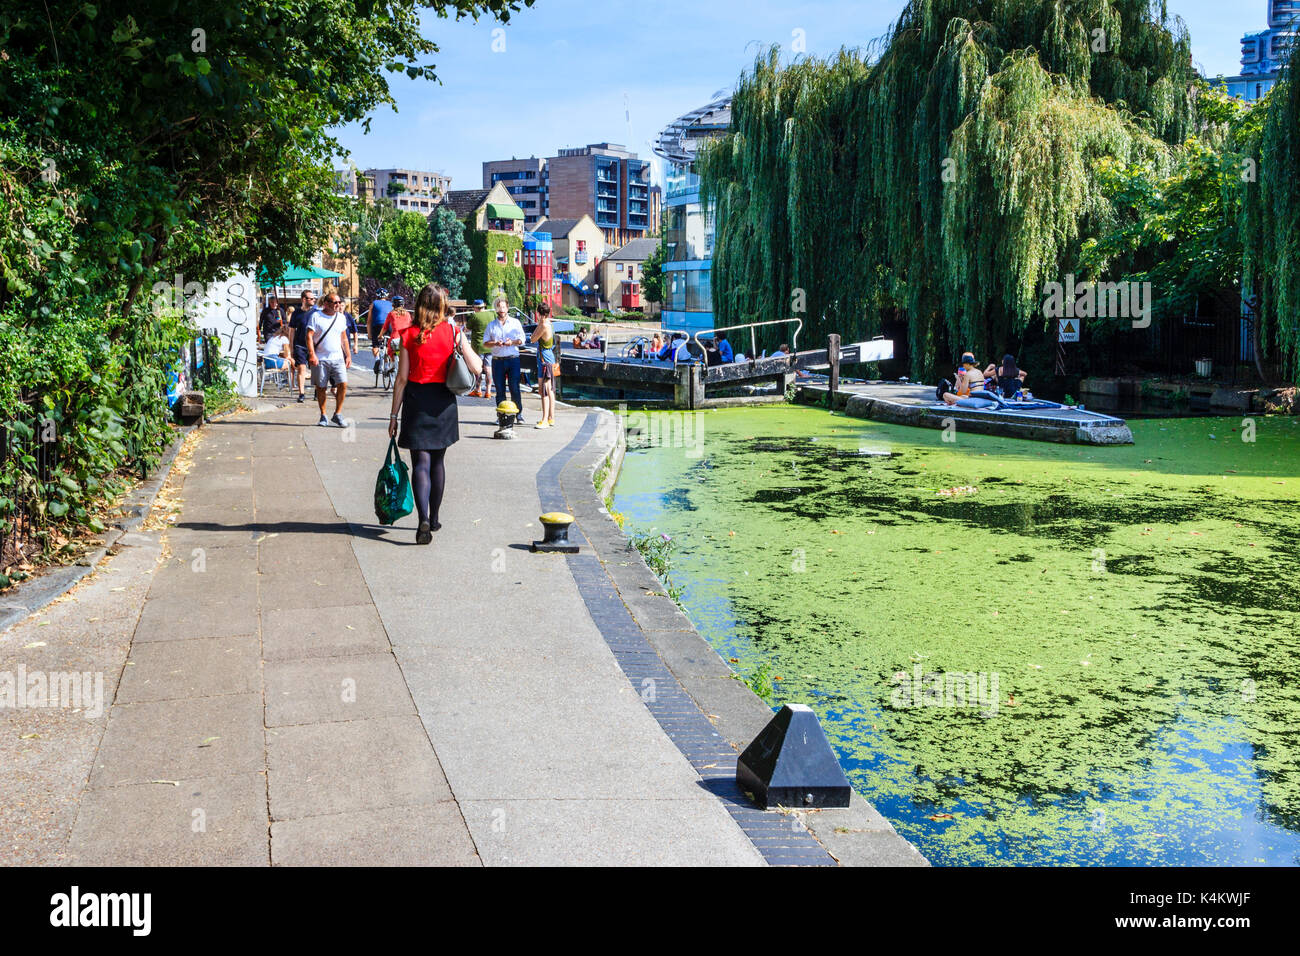 People basking in the sun and cooling off by City Road Lock as summer temperatures rise, Regent's Canal, Islington, London, UK Stock Photo